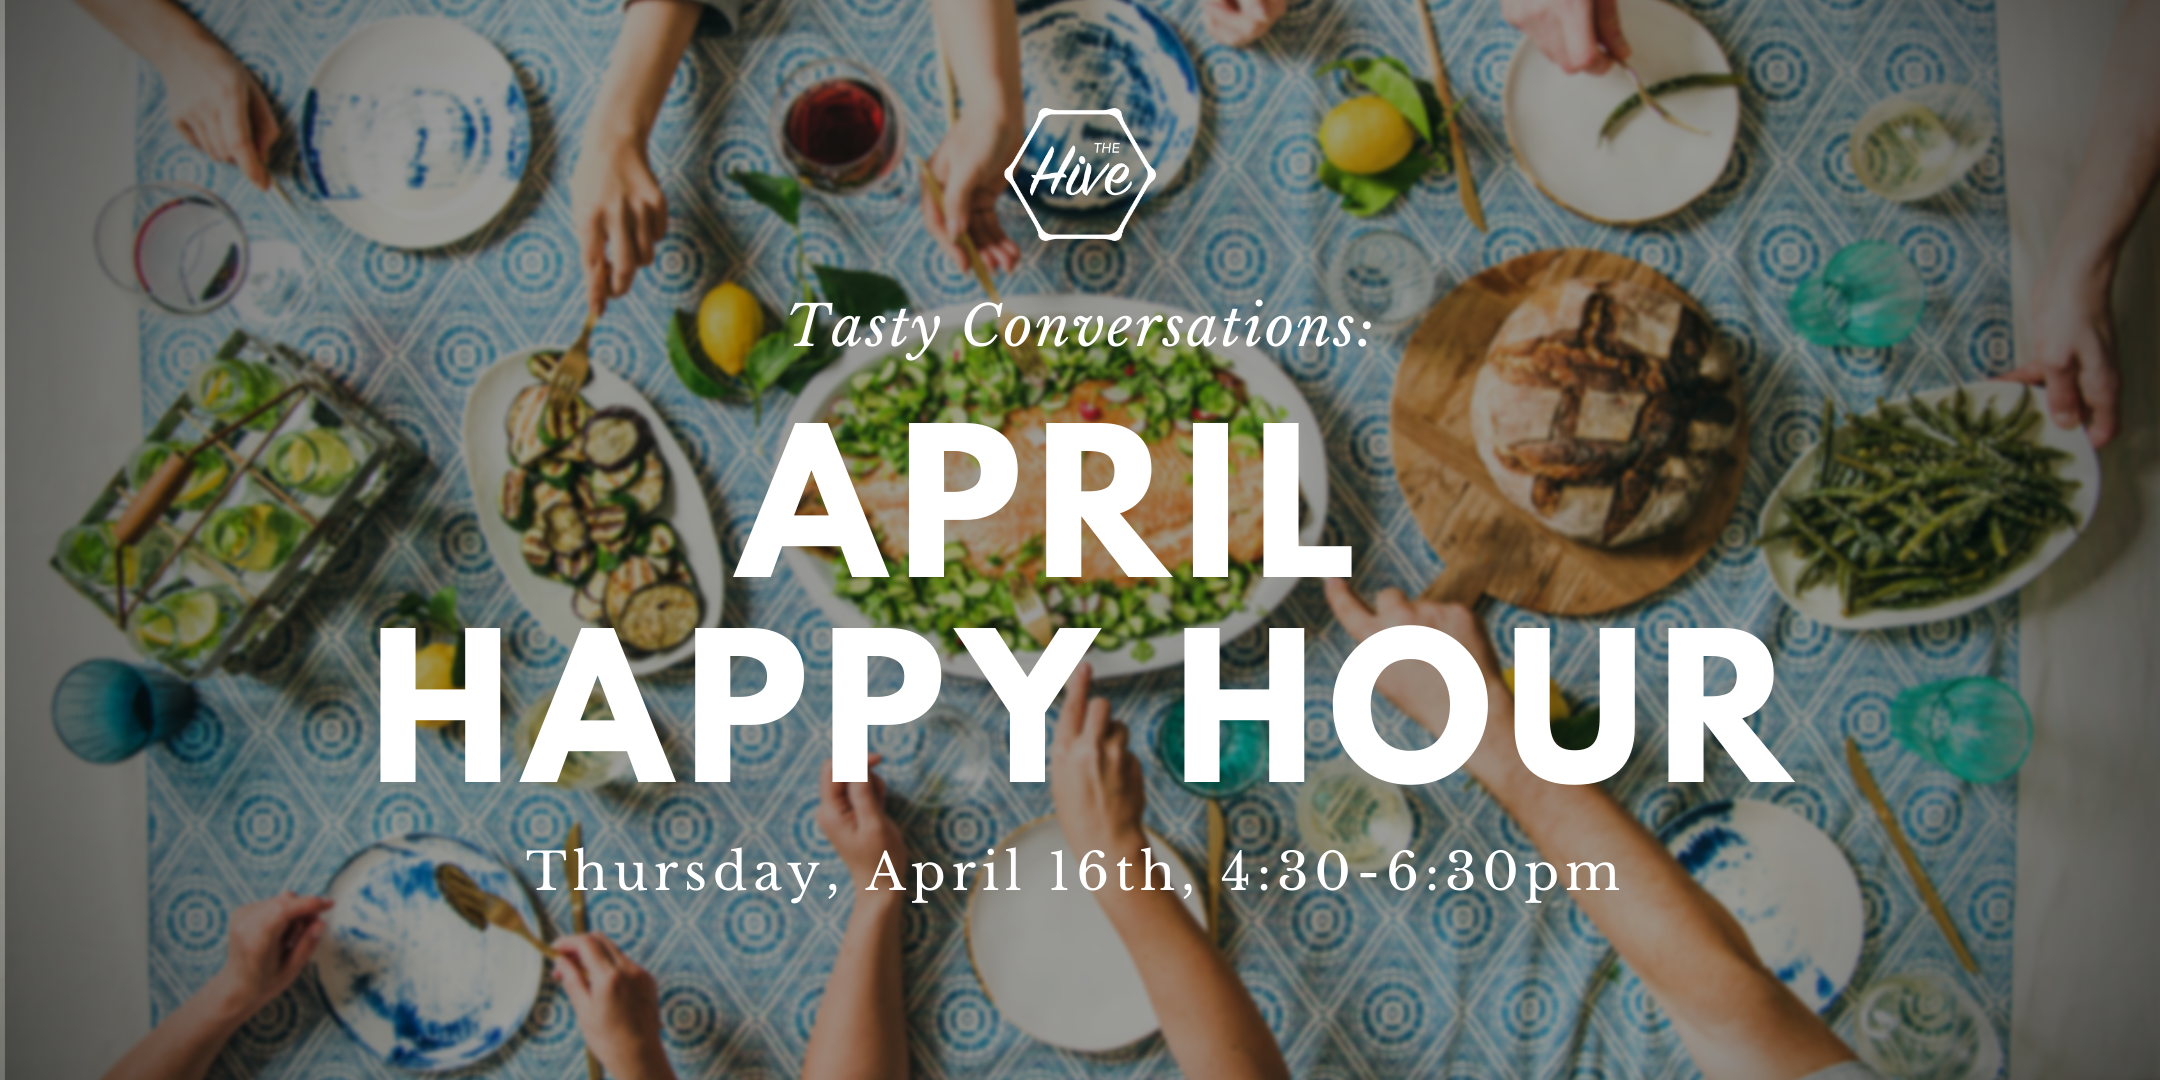 April Happy Hour at the Hive